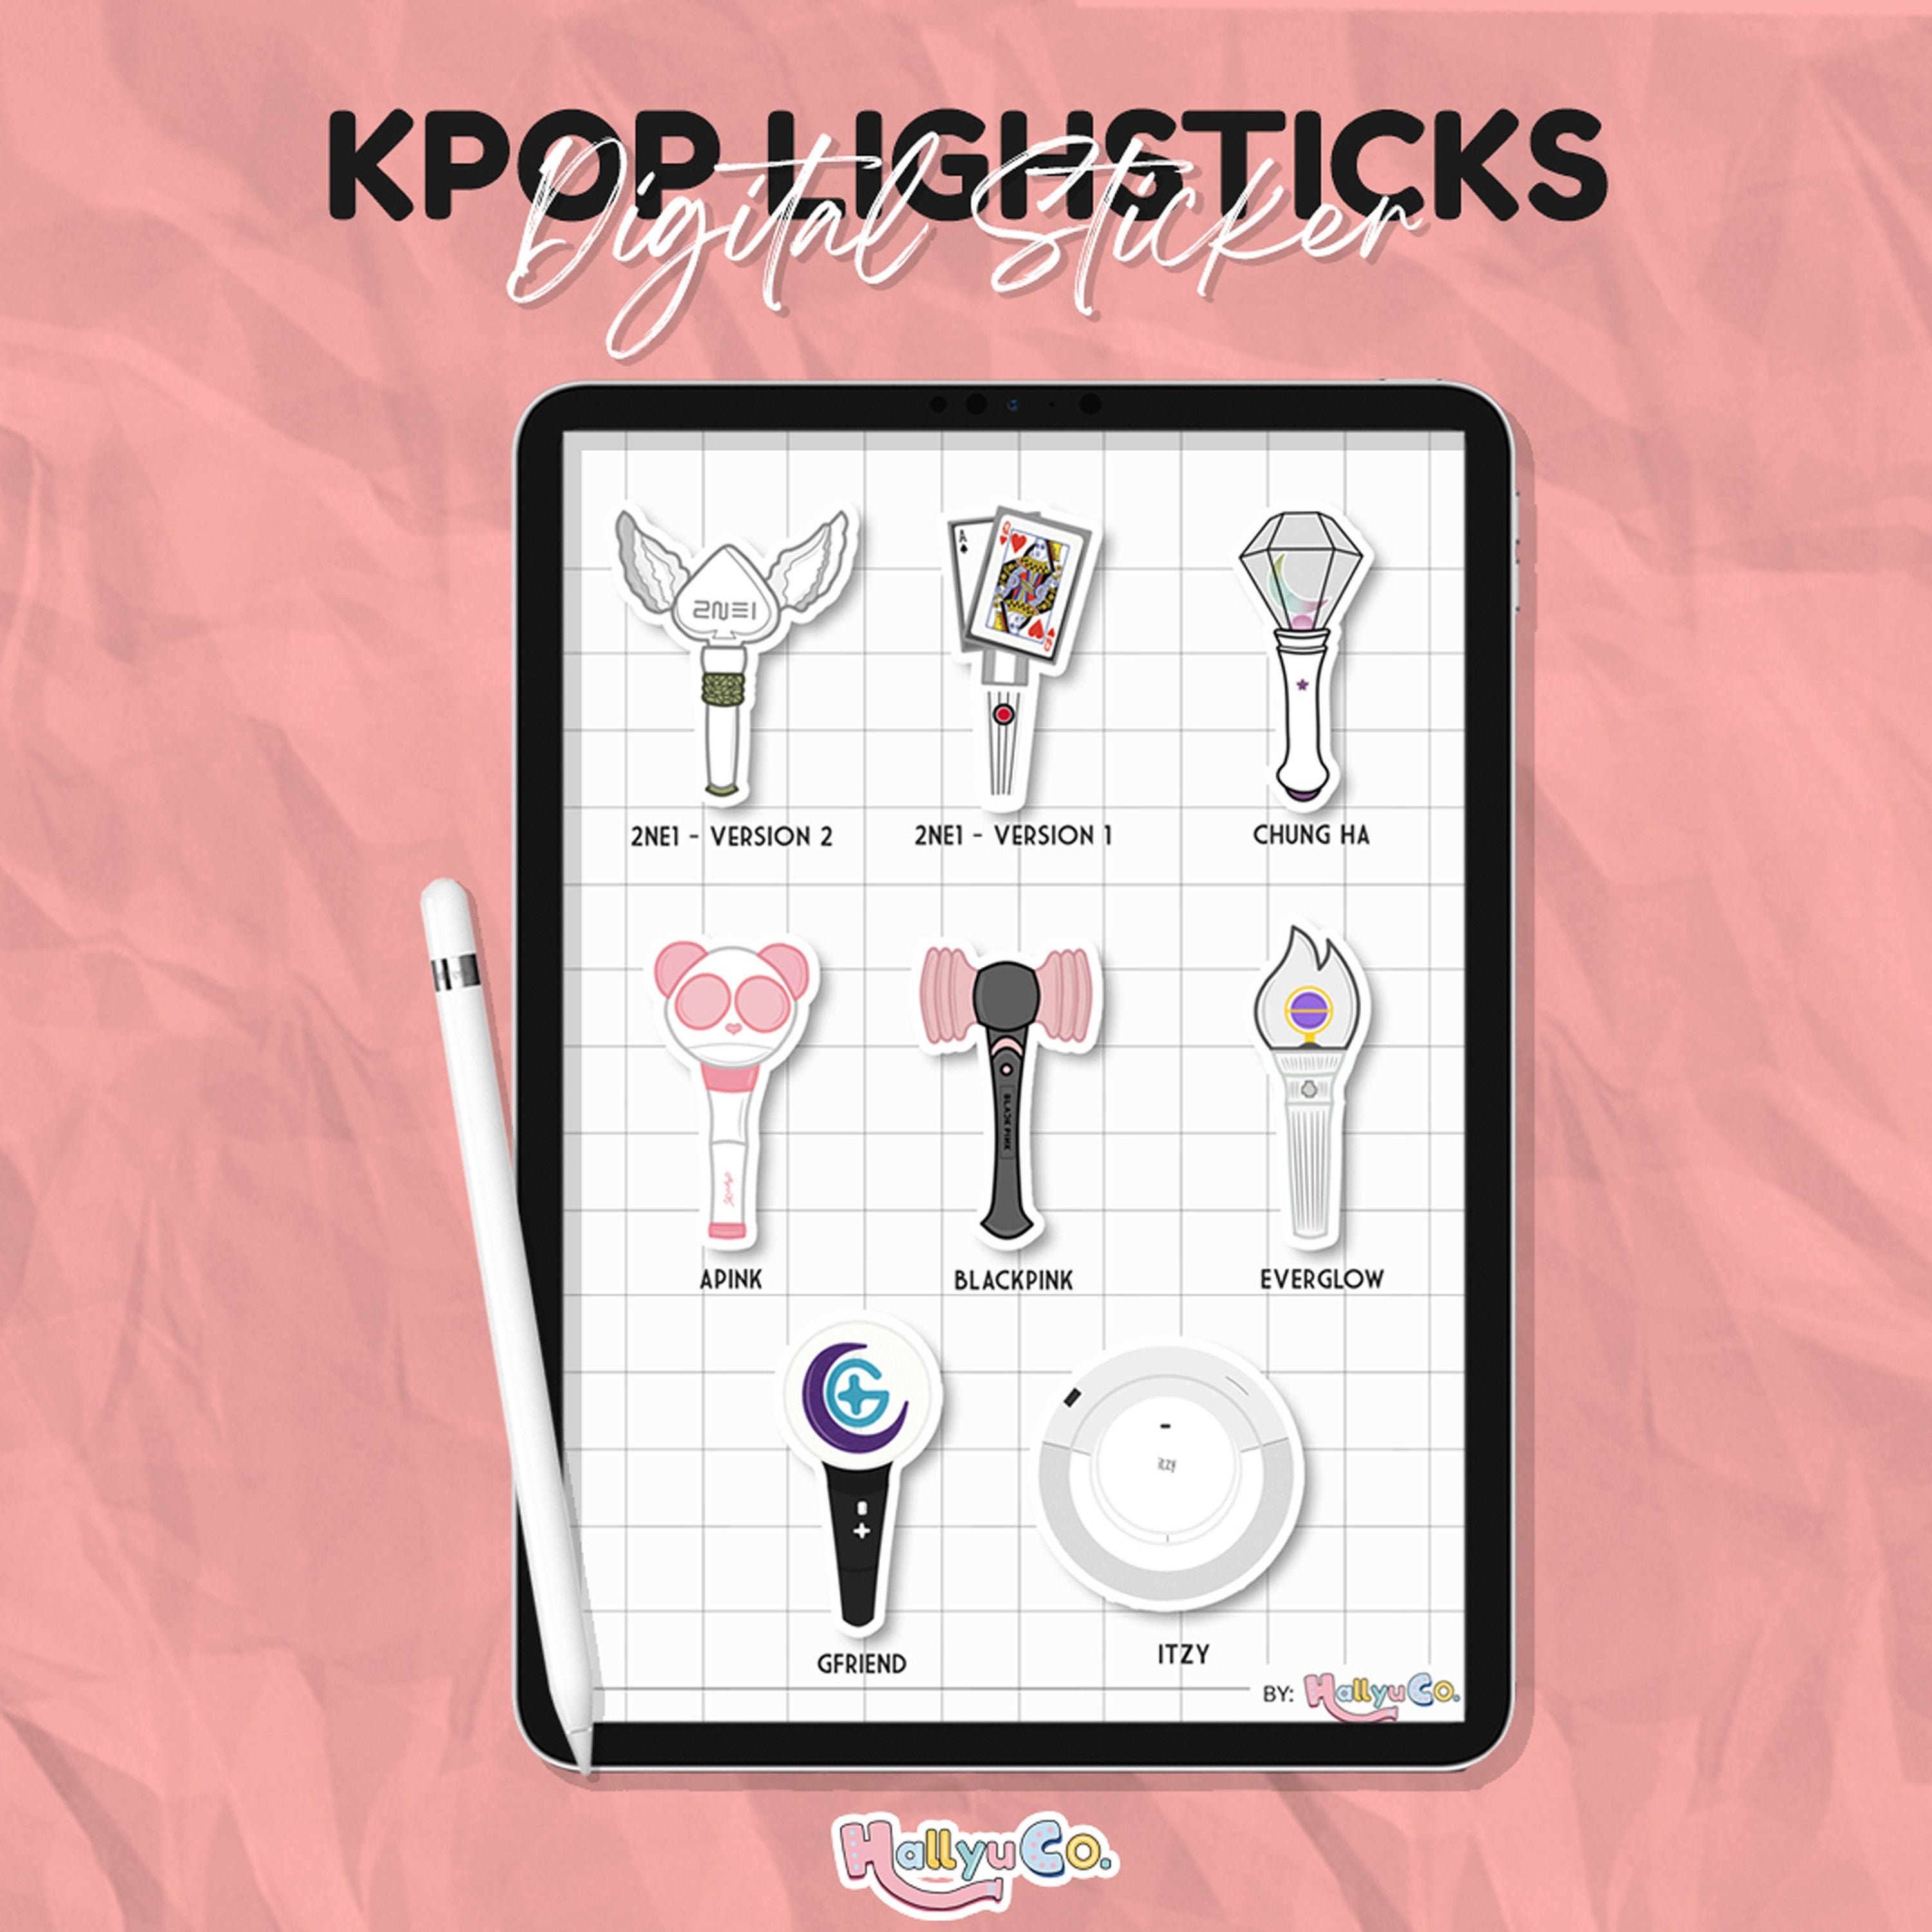 LIGHTSTICKS K-pop party STICKERS - Vaguartte's Ko-fi Shop - Ko-fi ❤️ Where  creators get support from fans through donations, memberships, shop sales  and more! The original 'Buy Me a Coffee' Page.